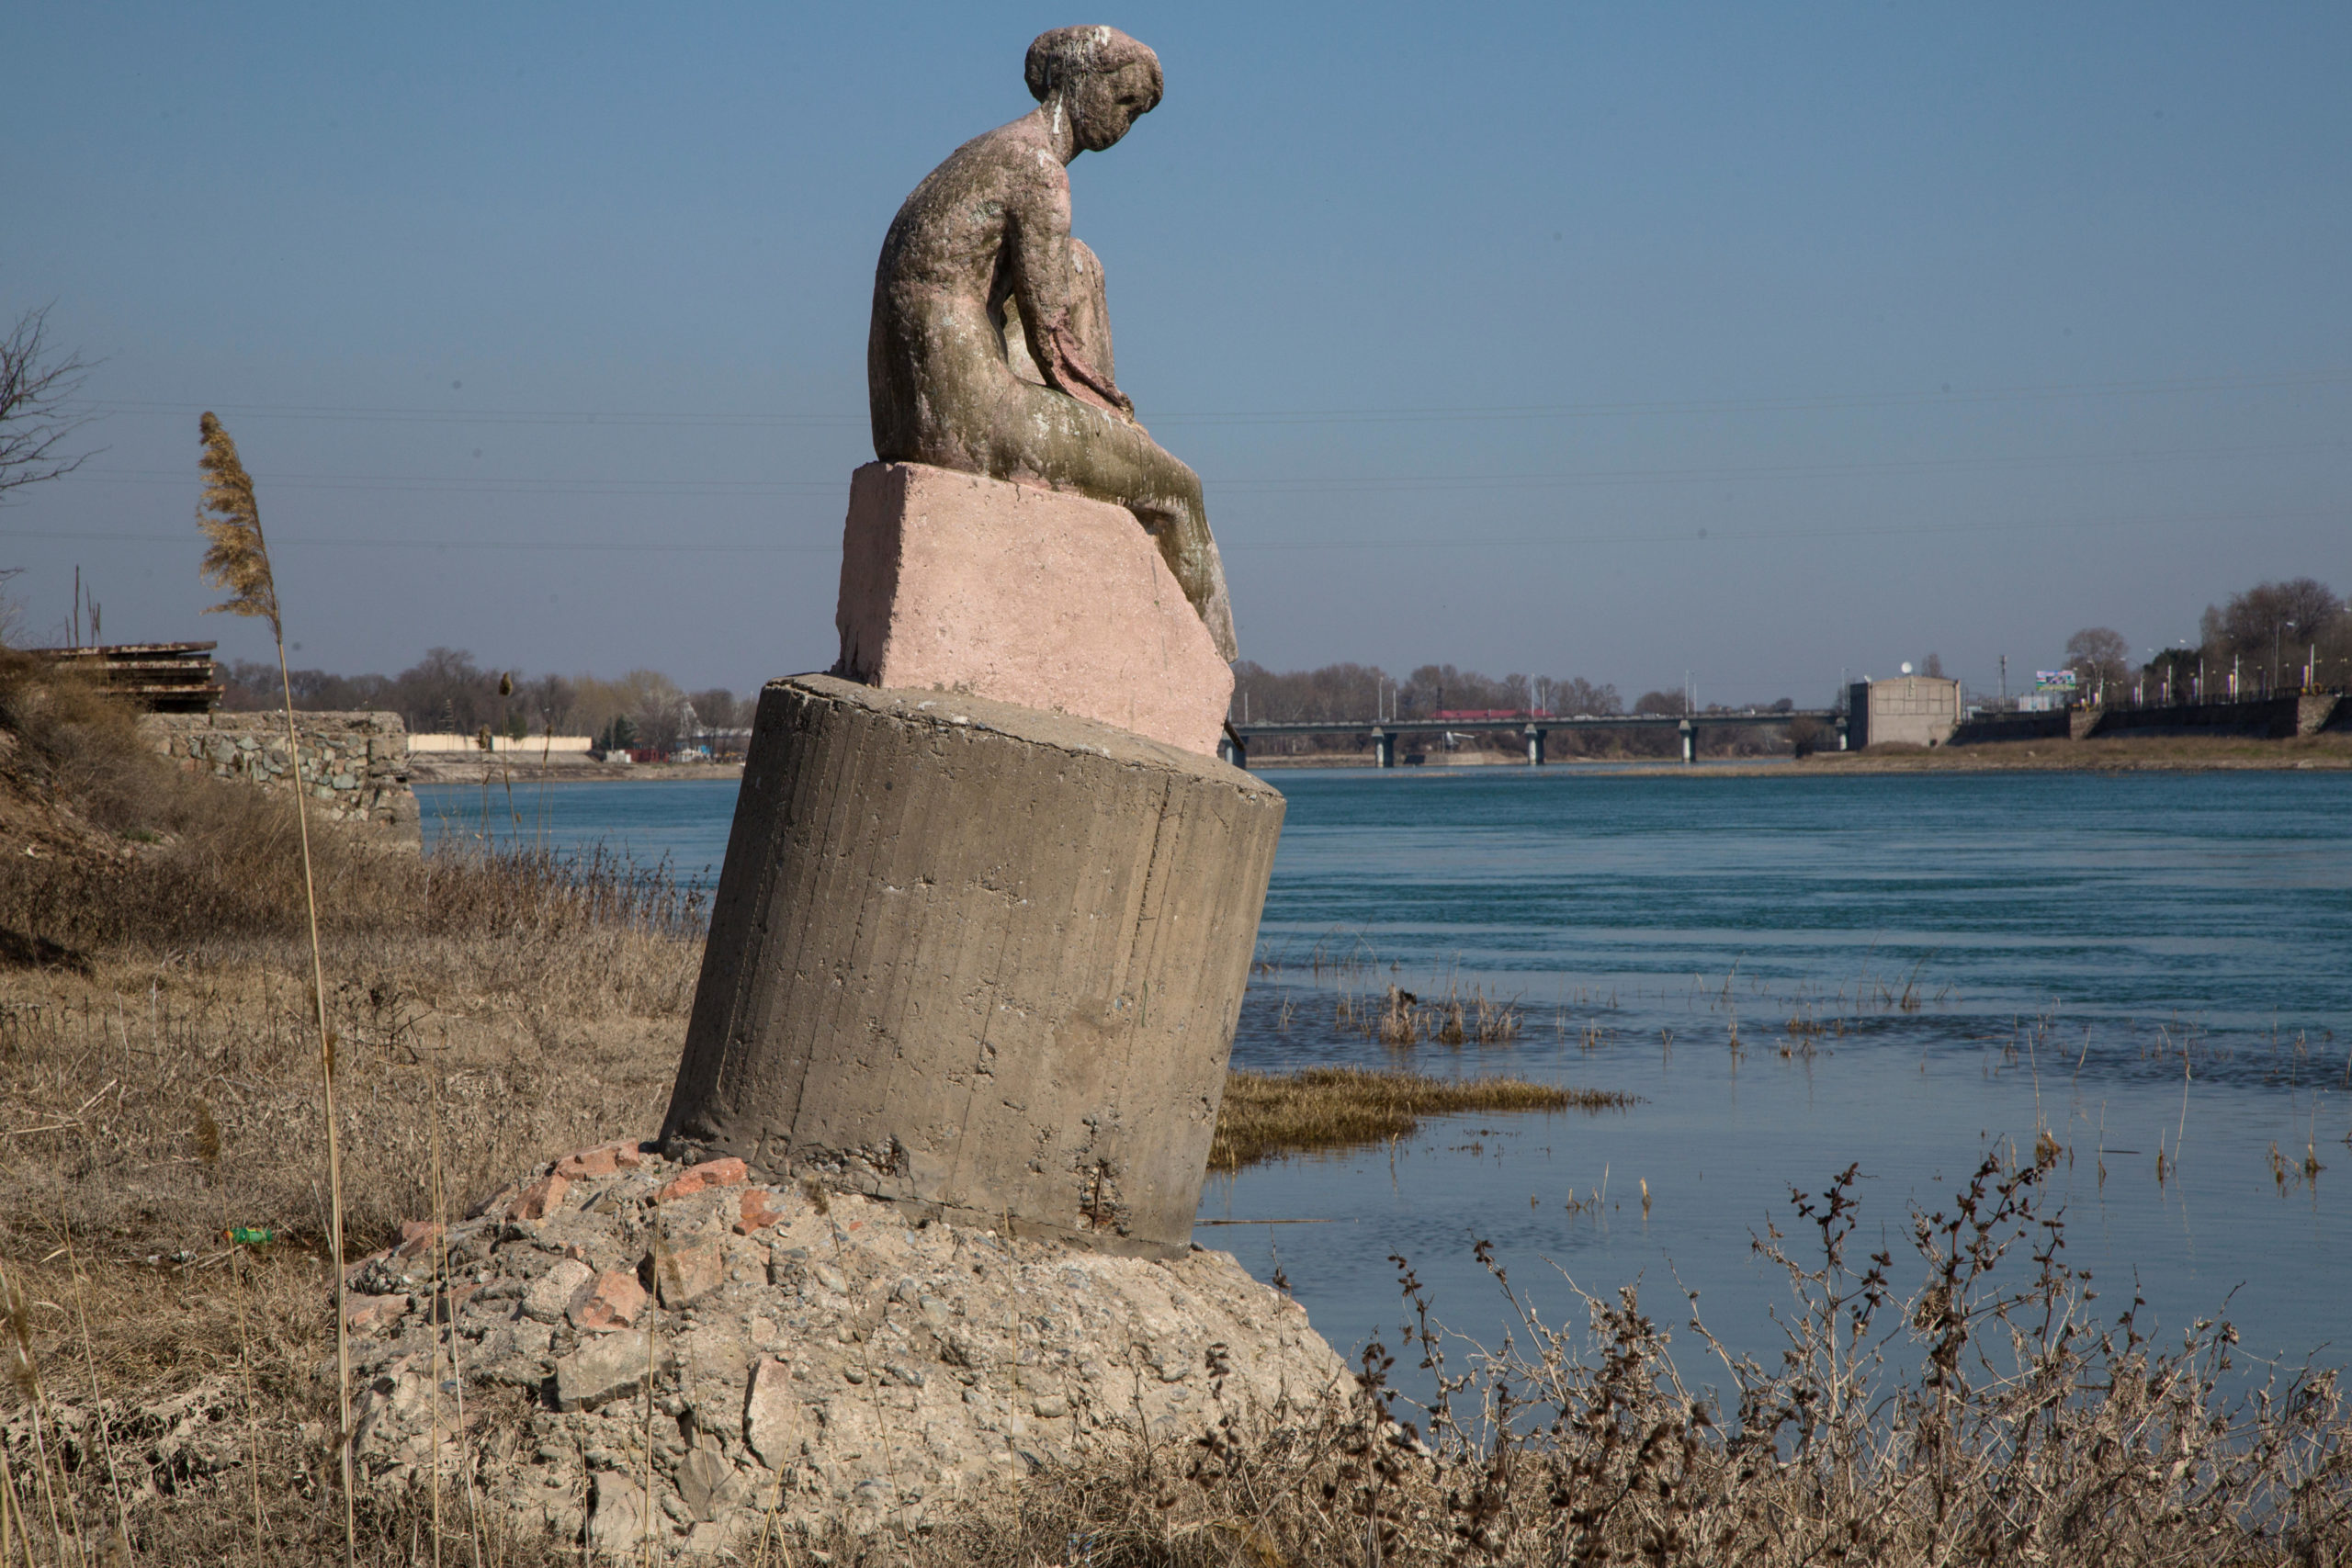 <p>A Soviet-era statue by the Syr Darya River in Central Asia. Before the collapse of the USSR water distribution was controlled centrally by Moscow. Today many of the features of this regime remain, despite changing requirements and climatic conditions. (Image: Nikolay Vinokurov / Alamy)</p>